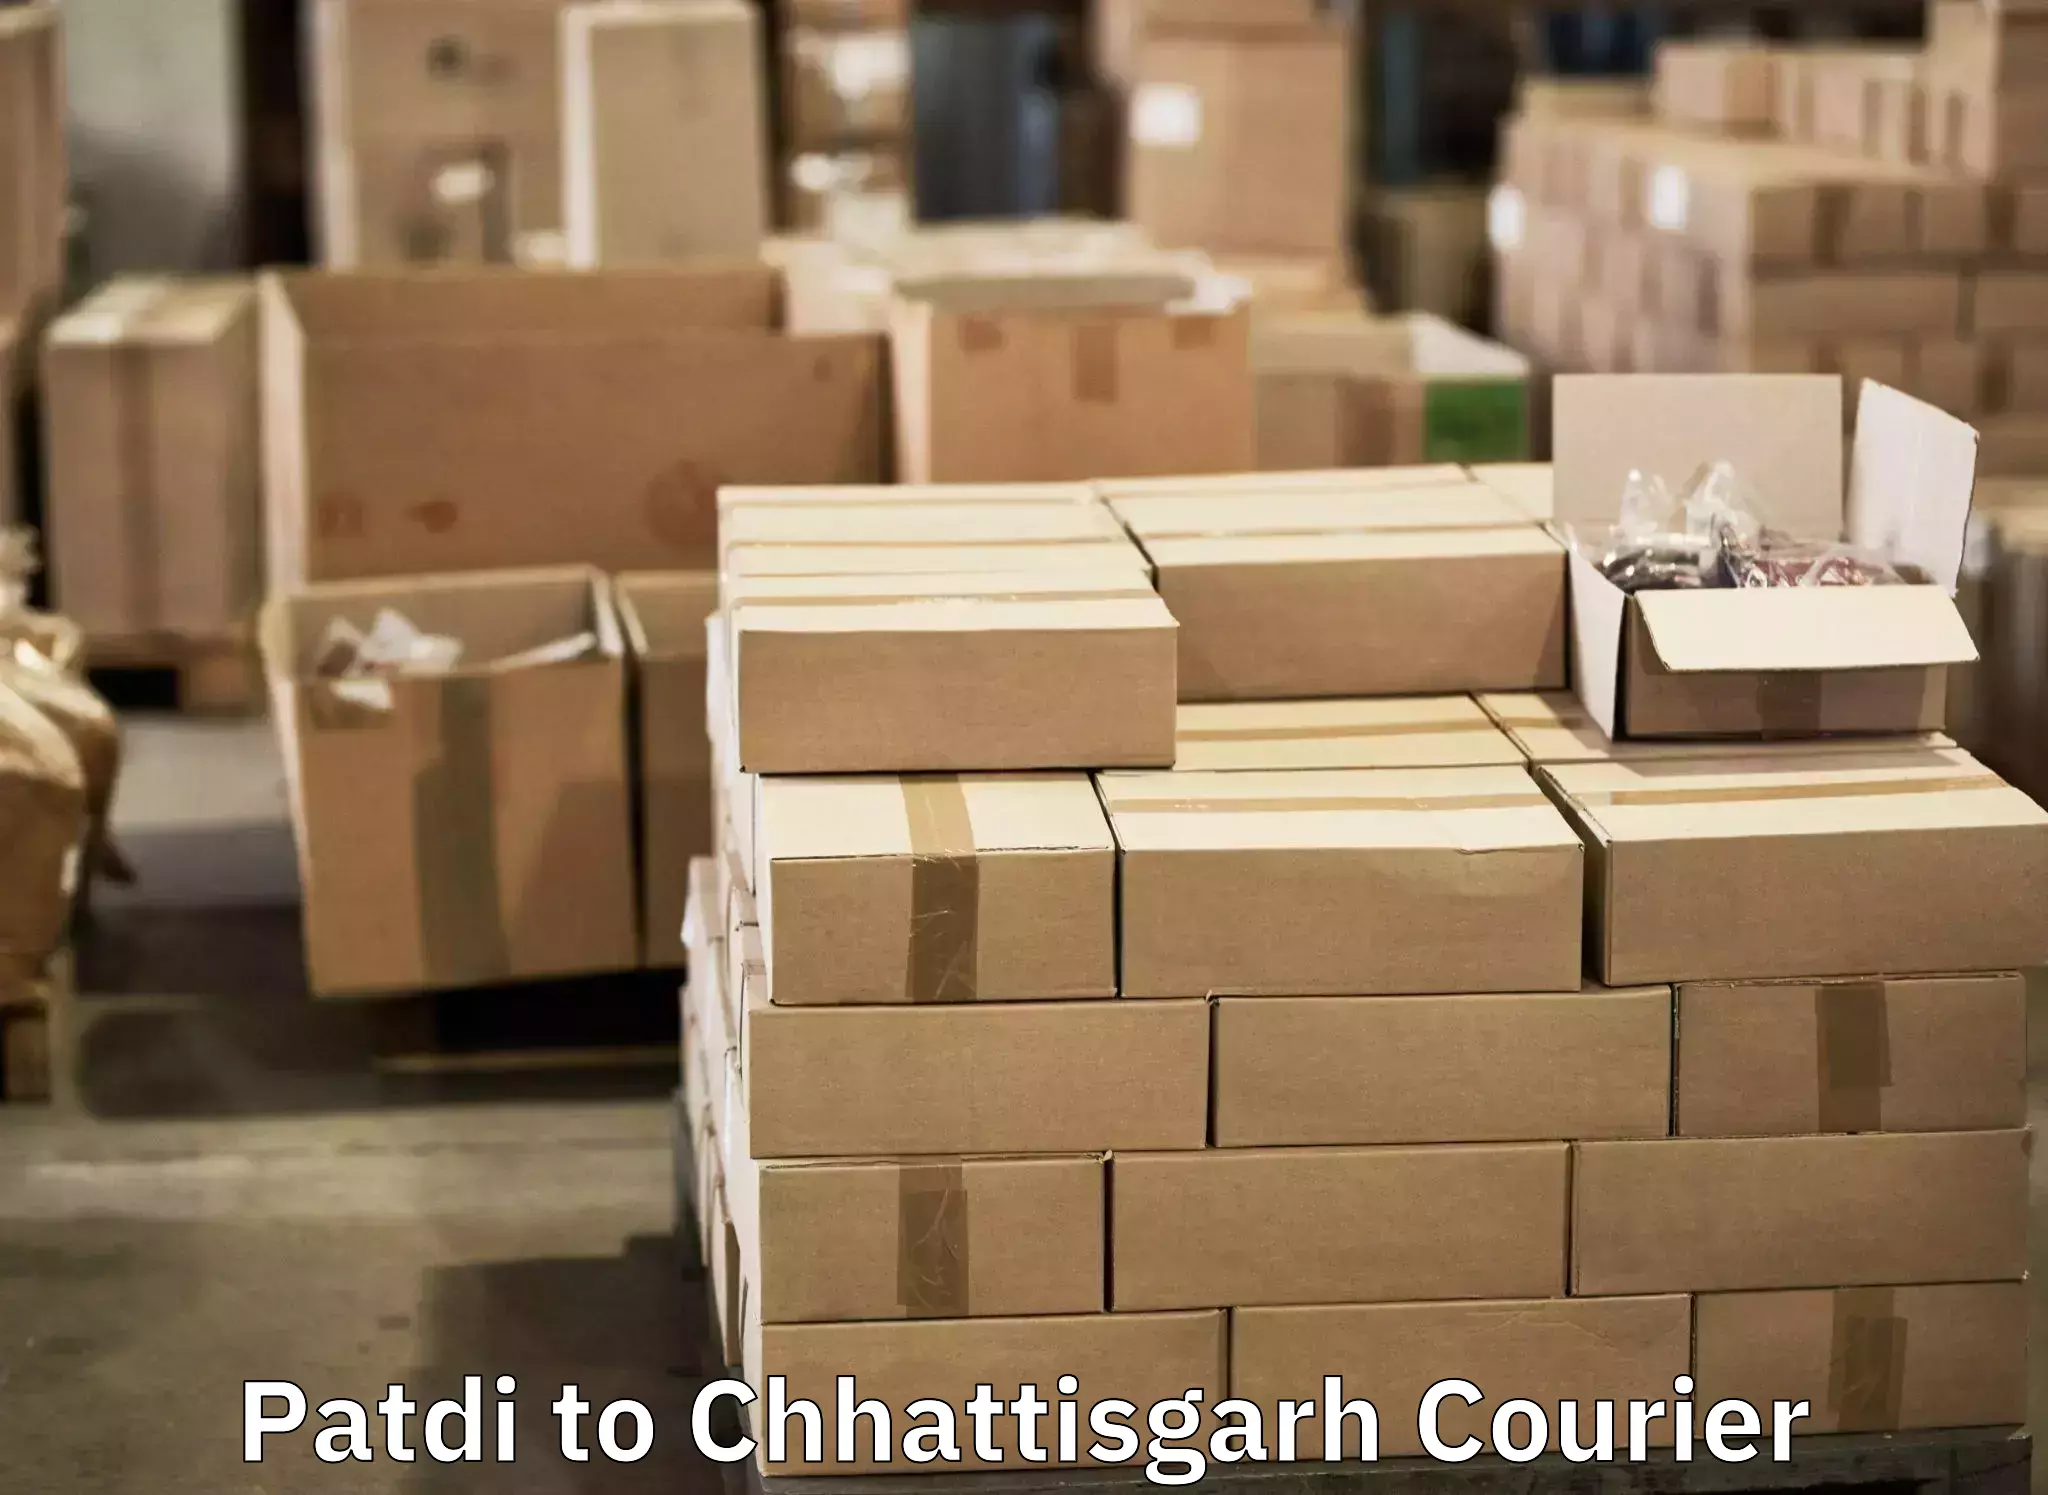 Baggage transport management in Patdi to Raigarh